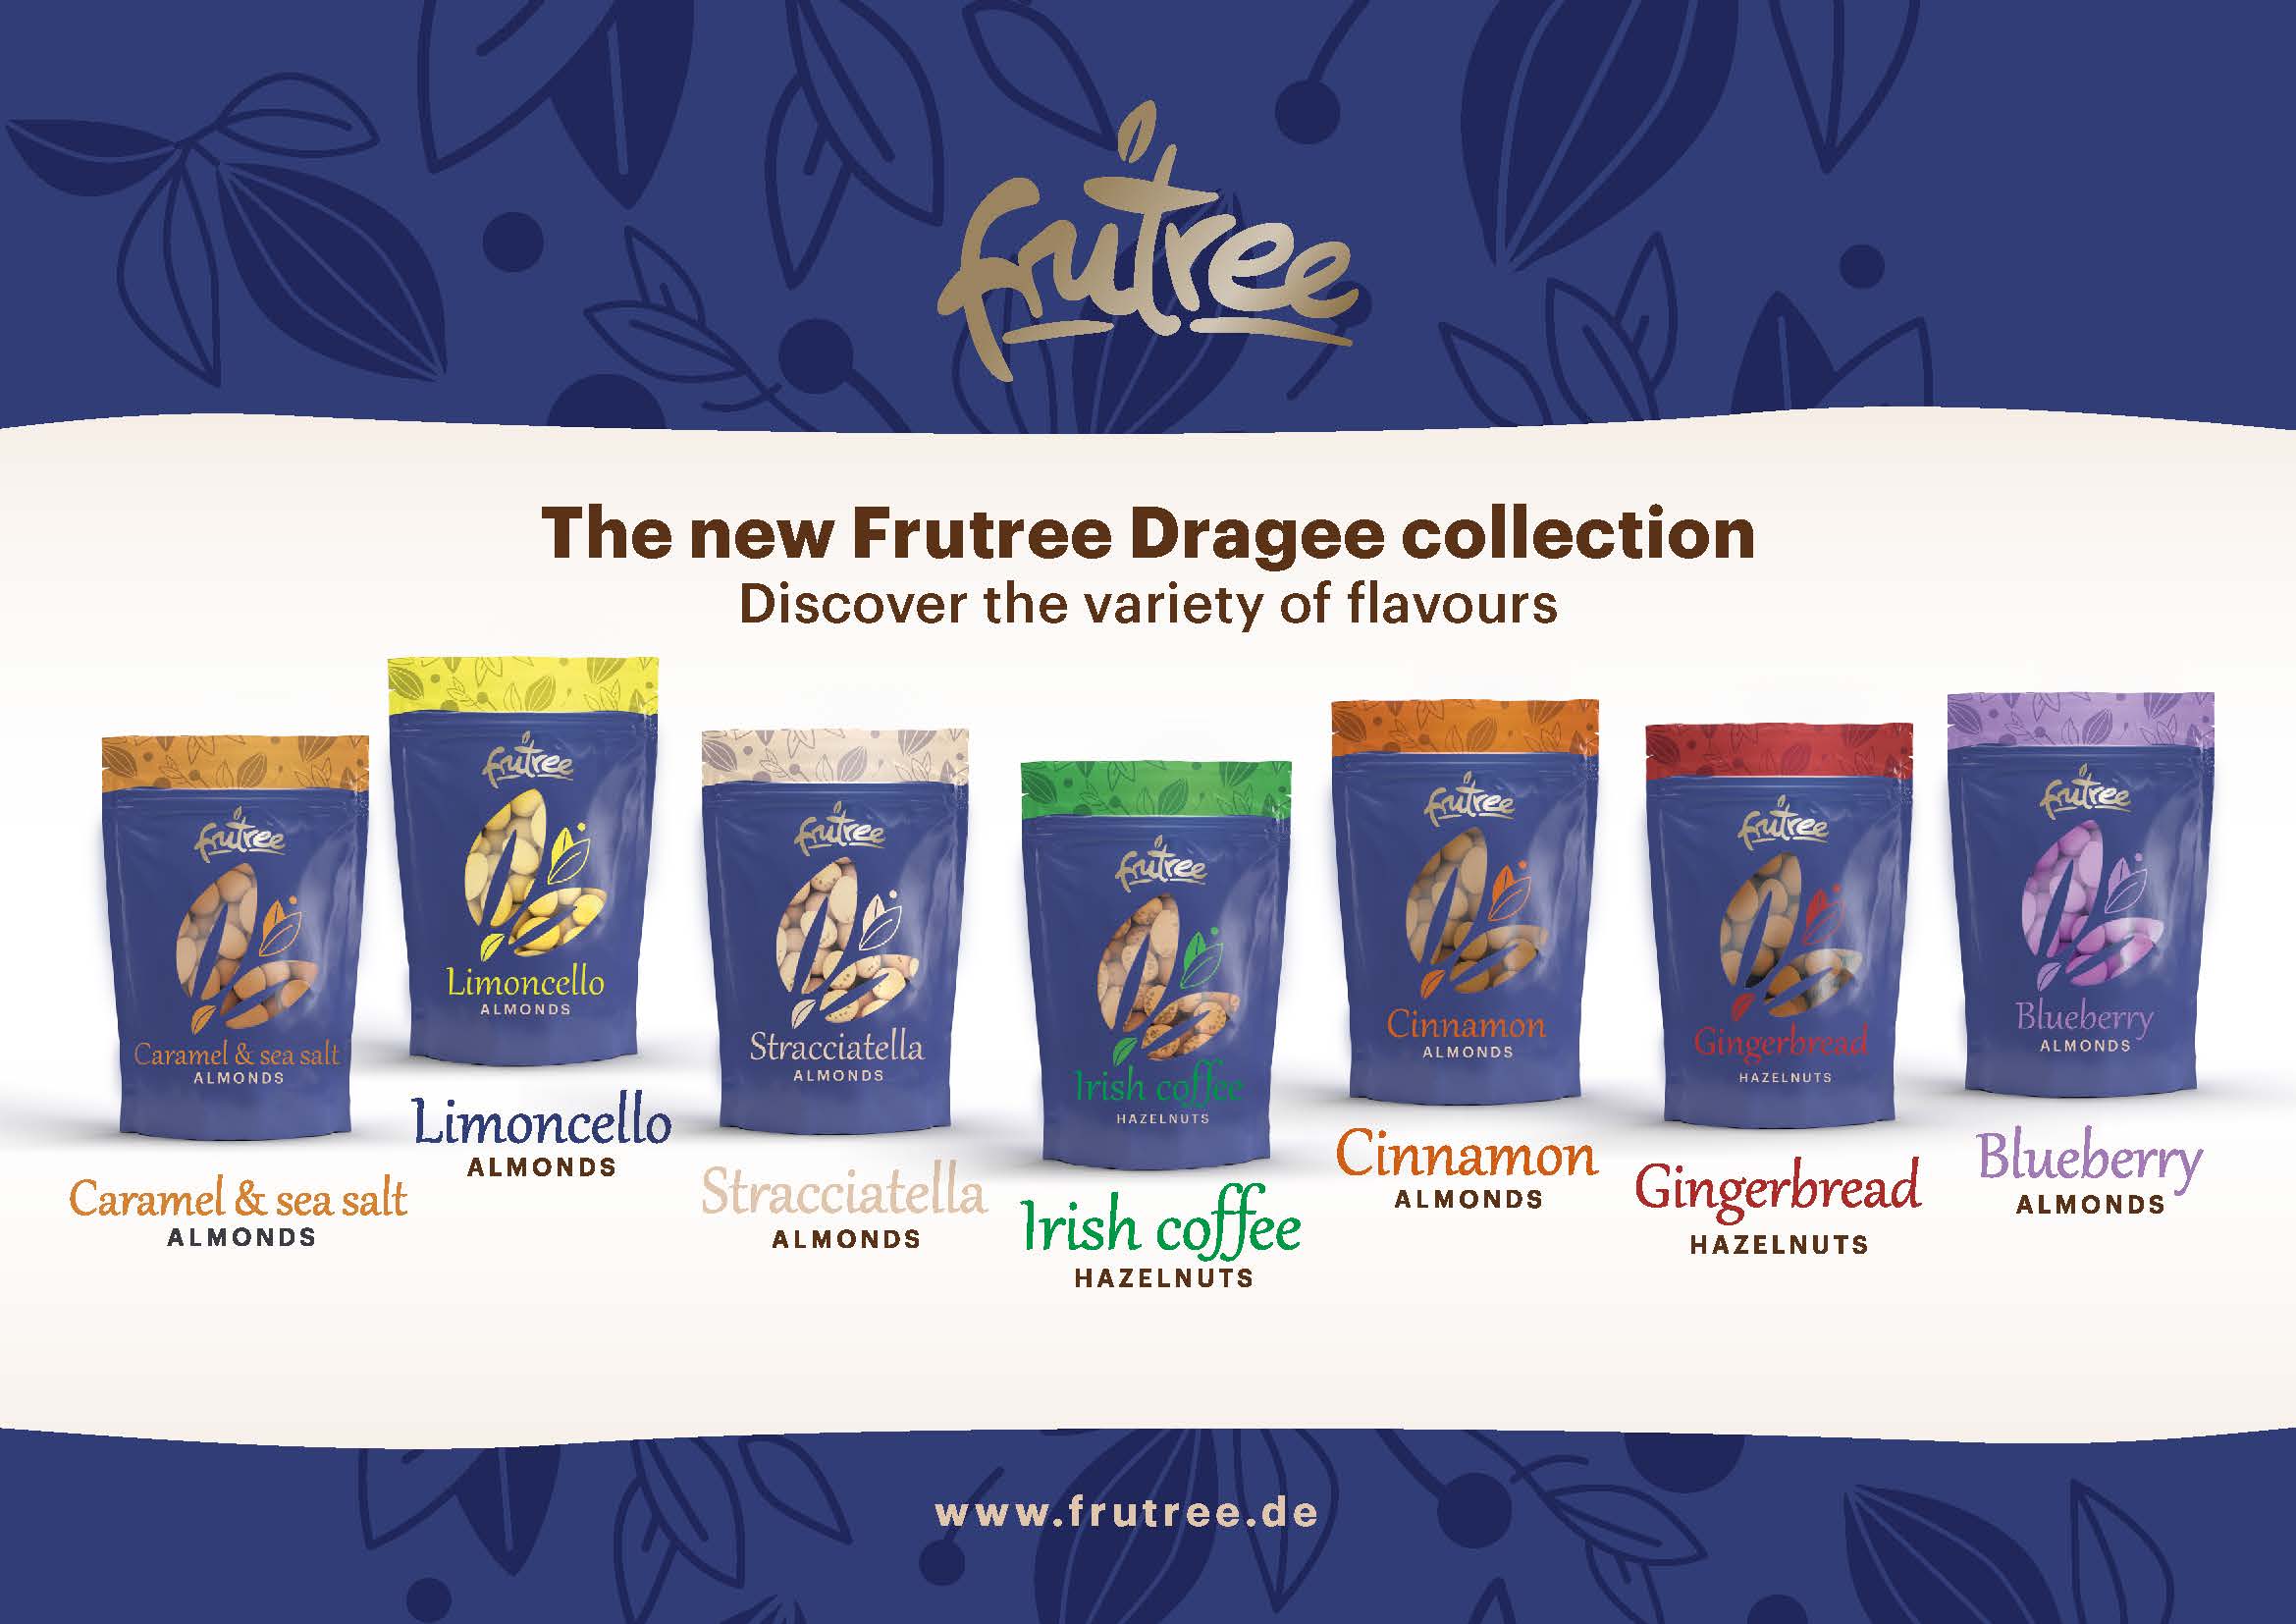 Frutree - The new luxury dragee collection